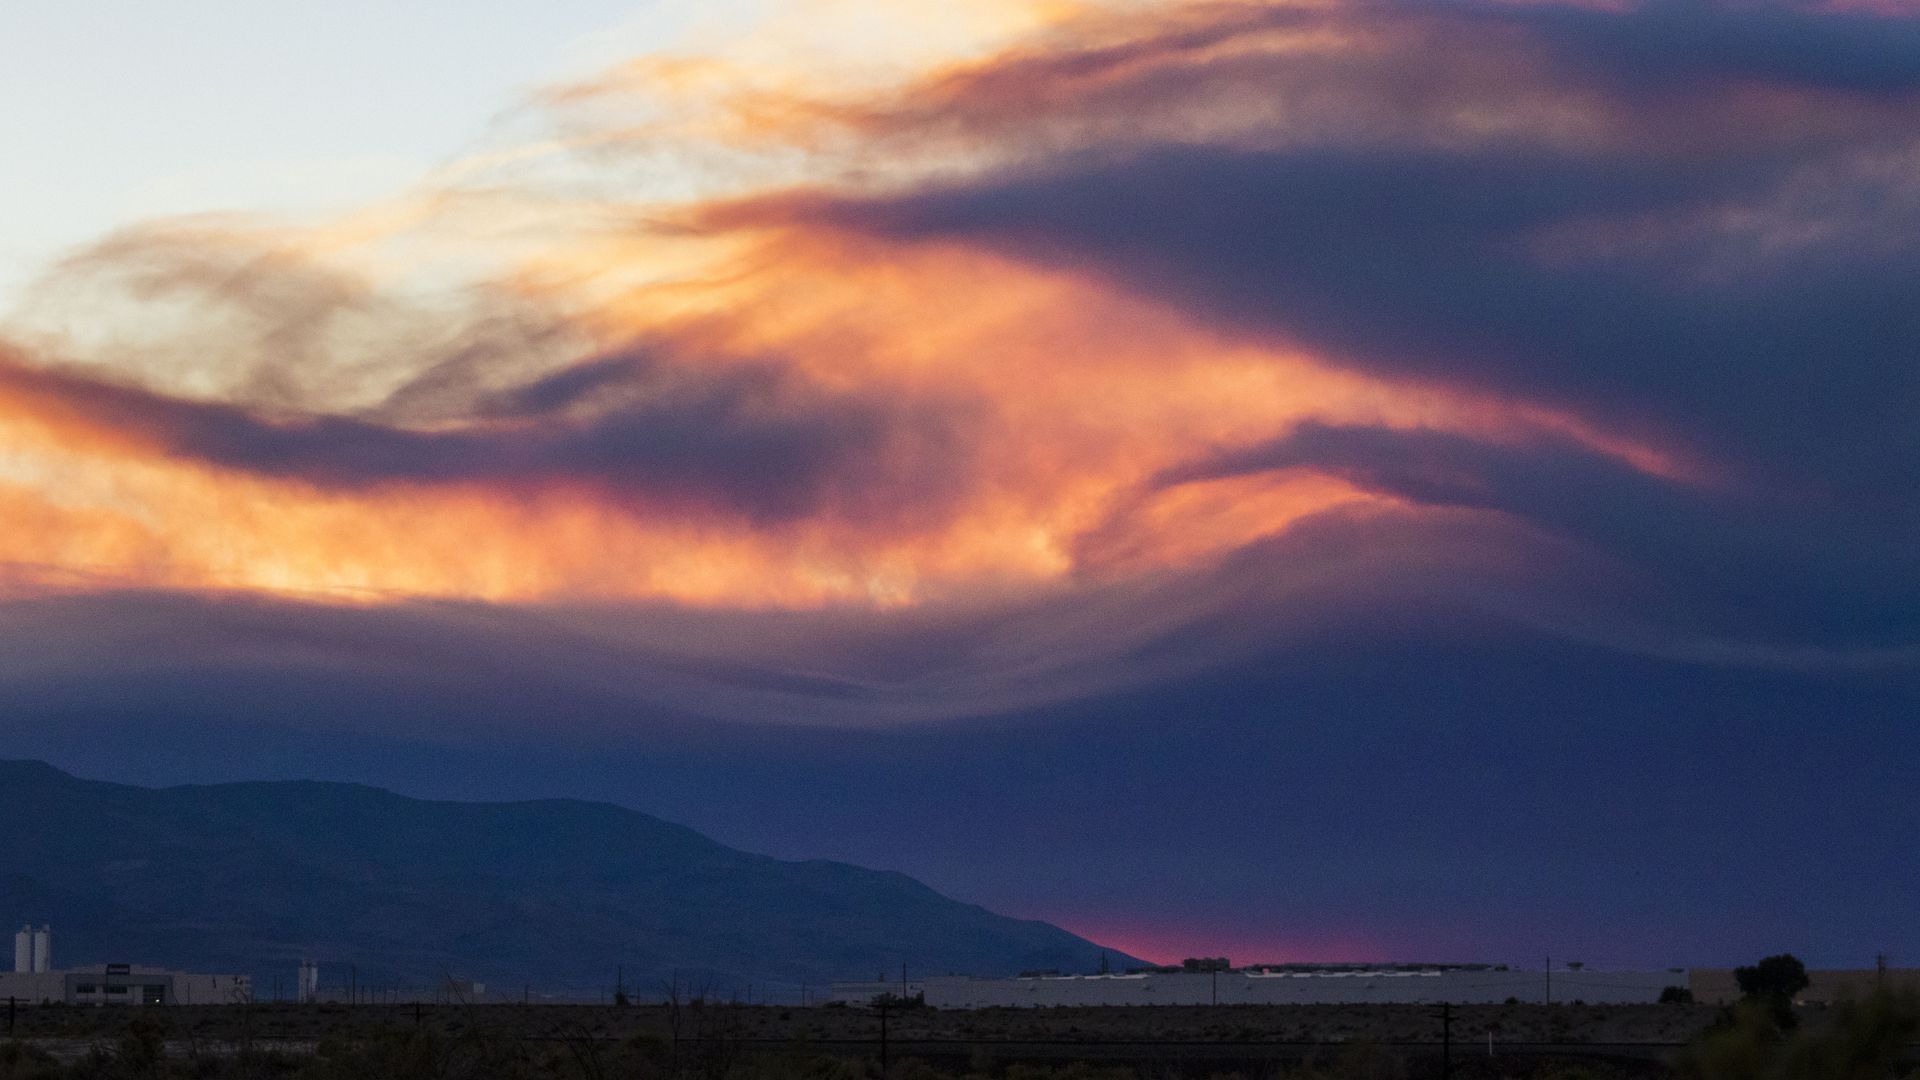 Smoke rises from the Beckwourth complex fire in Nevada. Photo: Ty O'Neil/SOPA Images/LightRocket via Getty Images